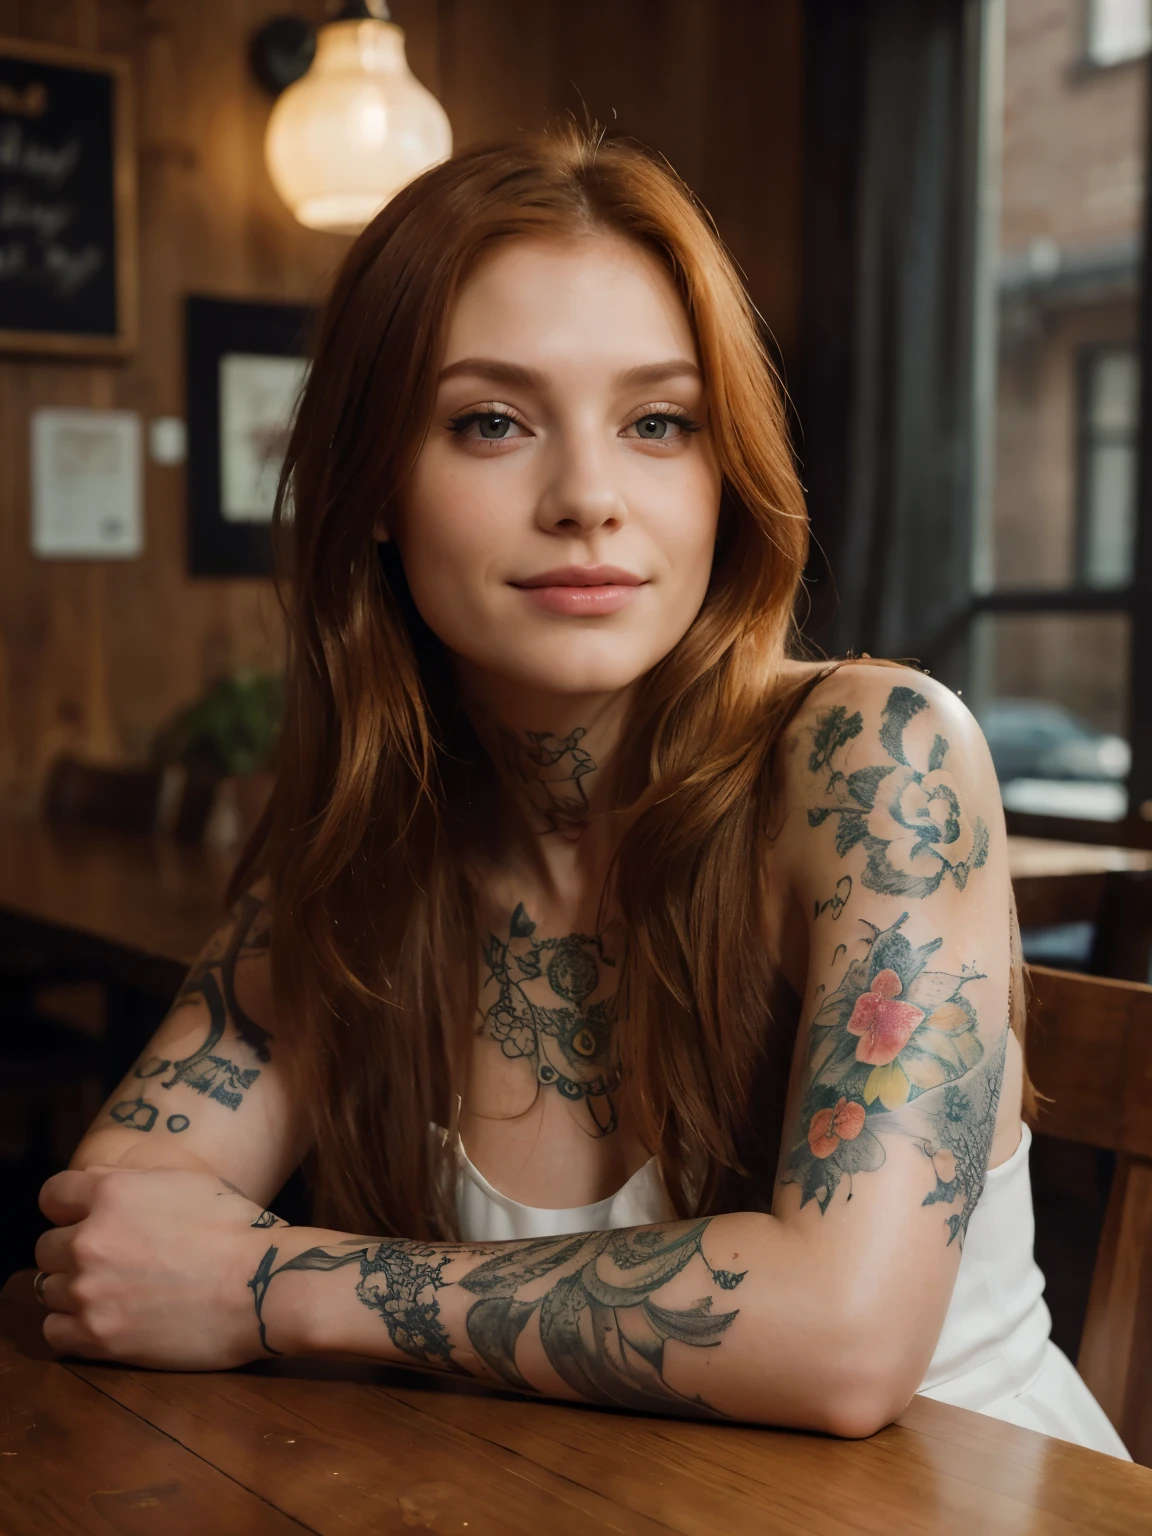 (realistic,tattooed,ginger:1.1)detailed girl(realistic, photorealistic:1.37),straight hair,detailed eyes, exposed and detailed arms (best quality,4k,8k,highres,masterpiece:1.2),wearing a dress,fine lines tattooed on both arms, sitting in a snack bar,hands on the table,lit by warm golden light,smiling face,relaxed pose,delicate facial features.